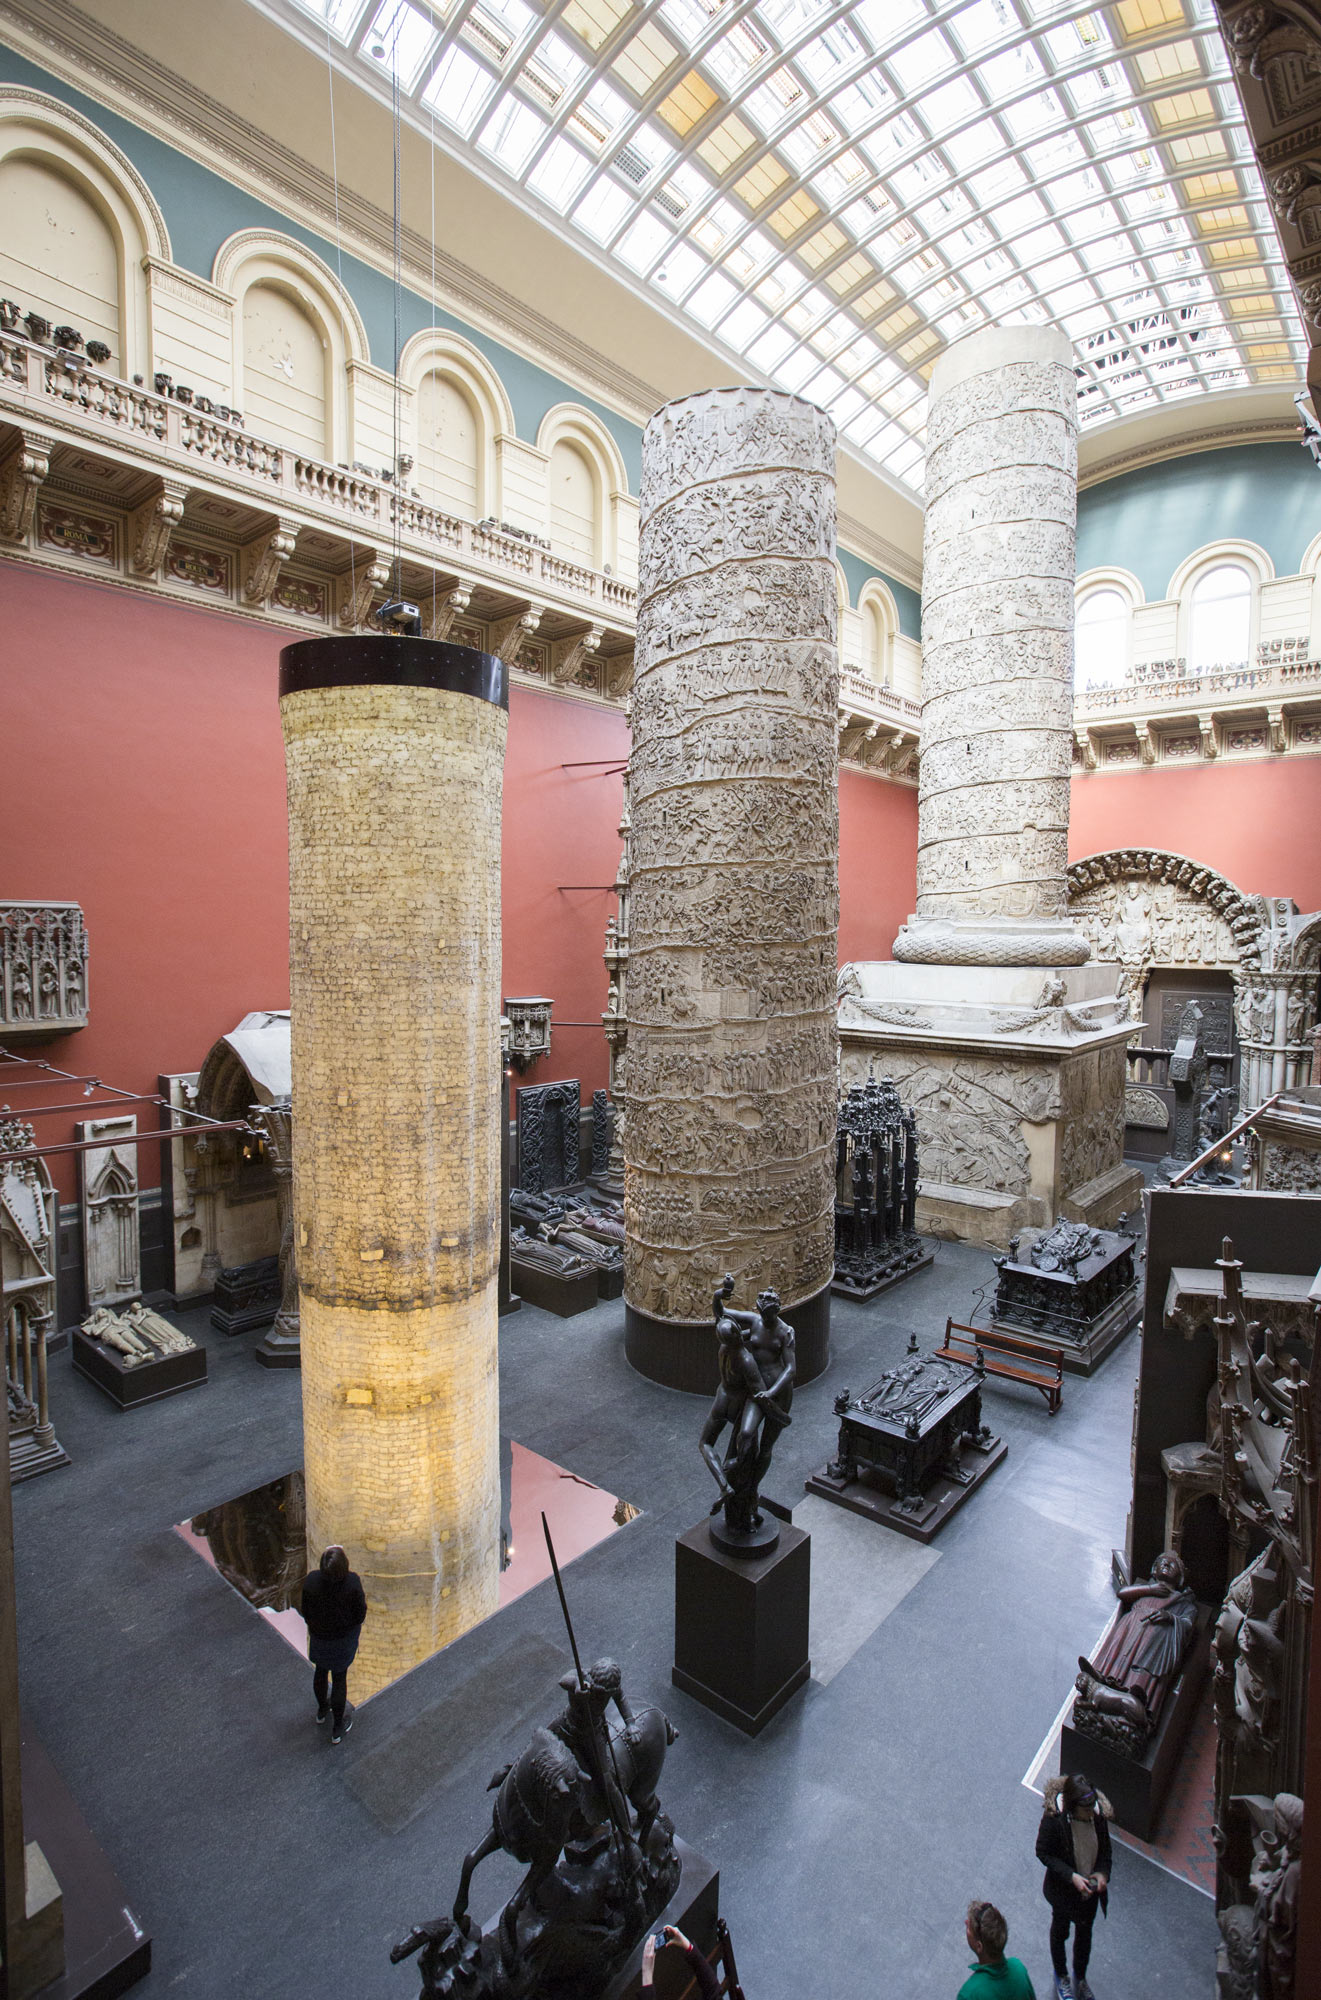 This installation consists of conservation latex used to clean the hollow inside of the cast of Trajan’s Column, the largest object in London's V&A museum. Photo courtesy of Peter Kelleher and the V&A.